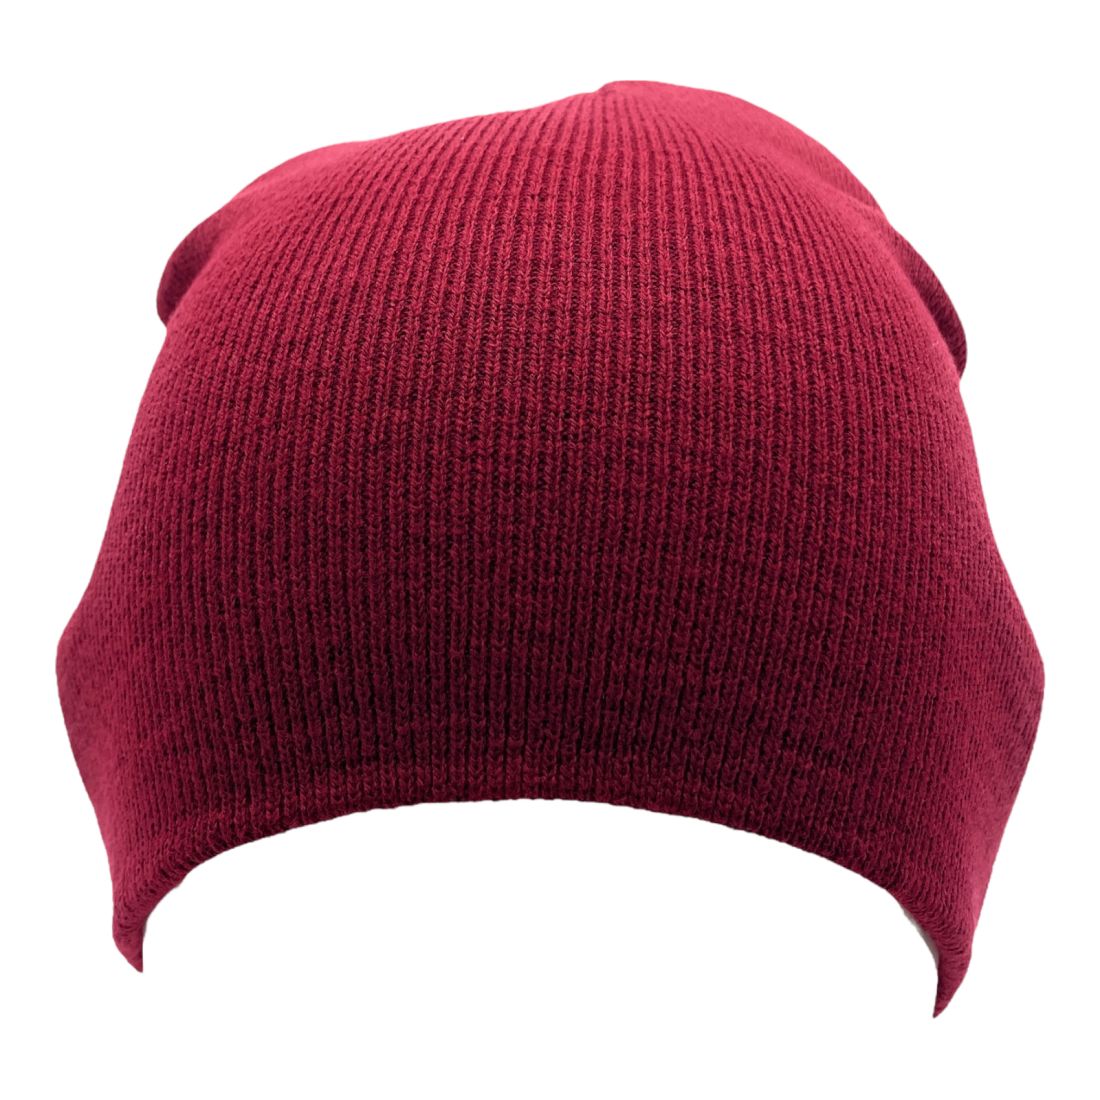 Mens Slouchy Ribbed Knitted Beanie Hat Winter Toboggan Ski Soft